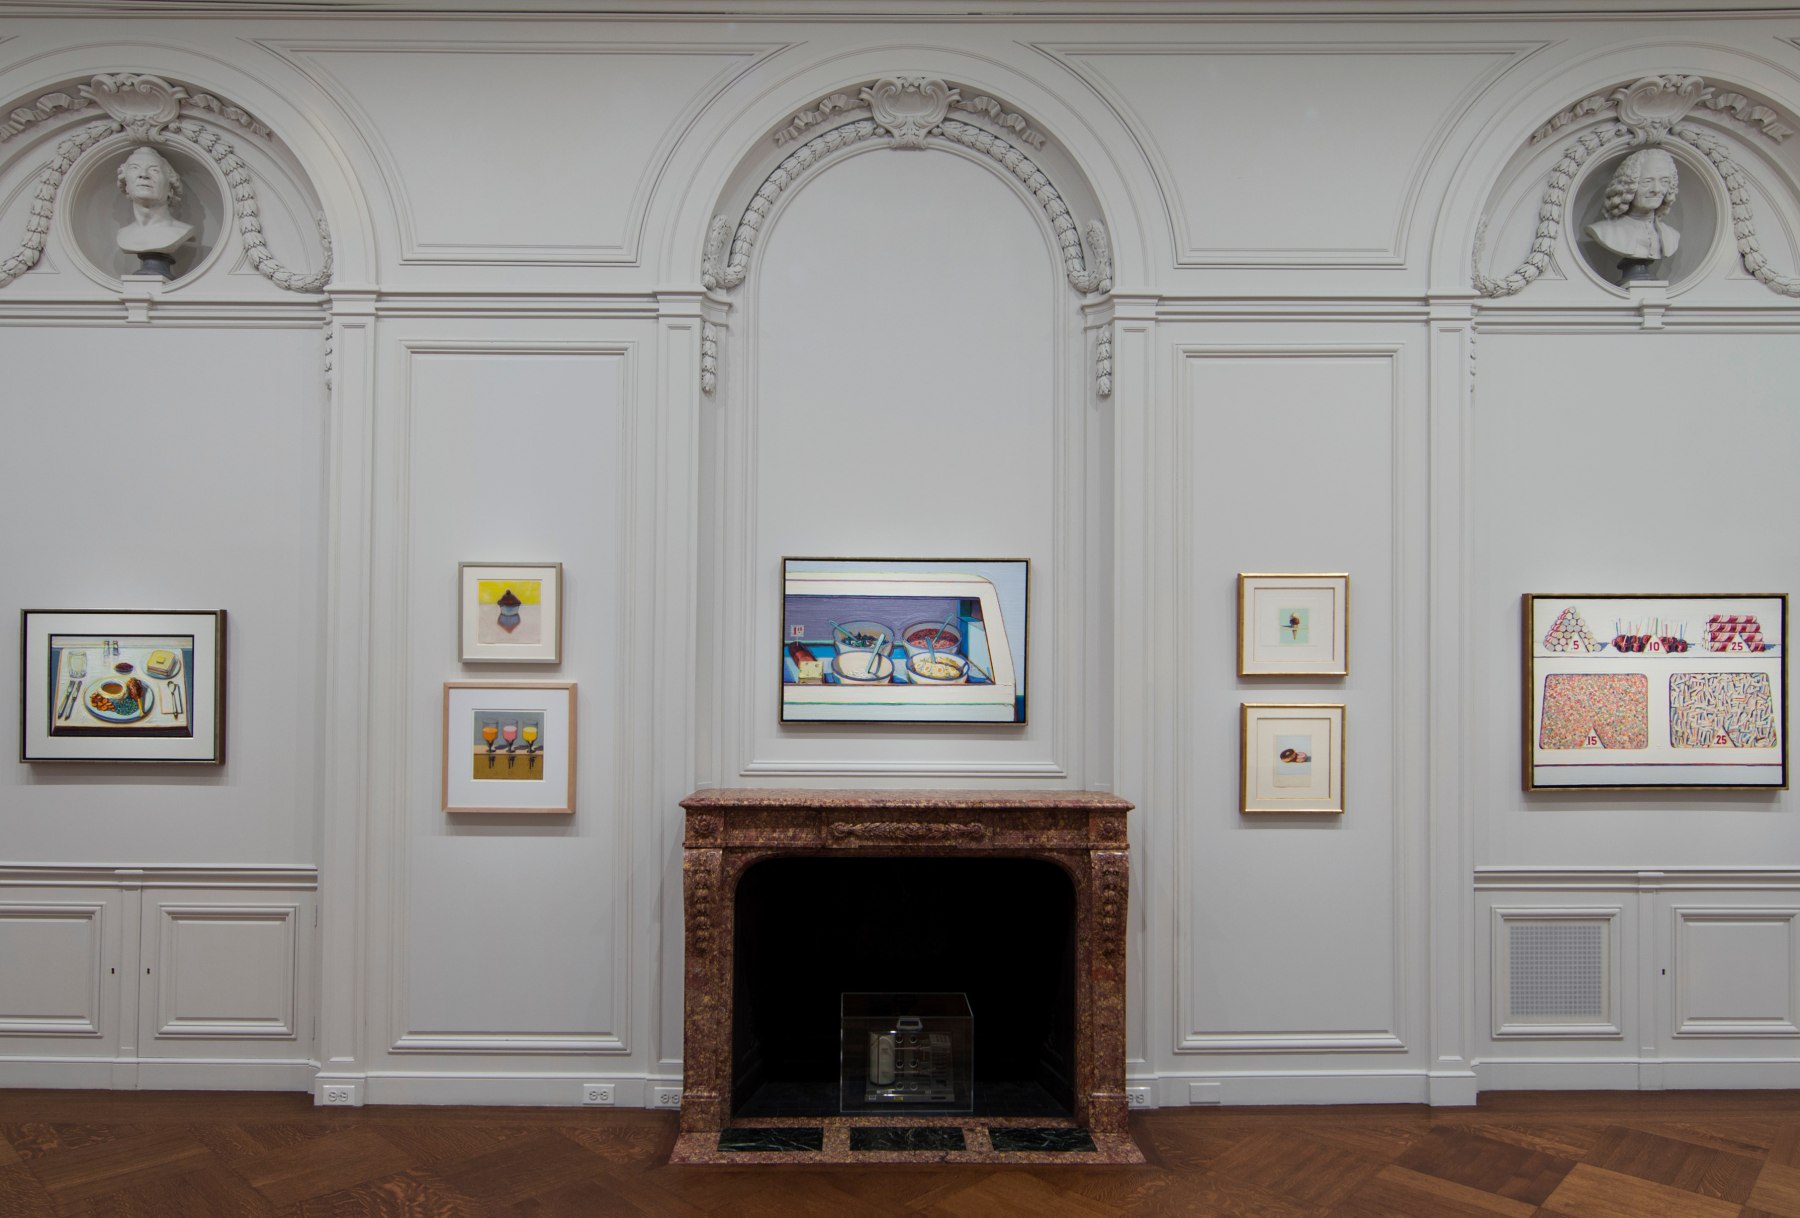 Installation view of Wayne Thiebaud: A Retrospective at Acquavella Galleries from October 22 - November 29, 2012.